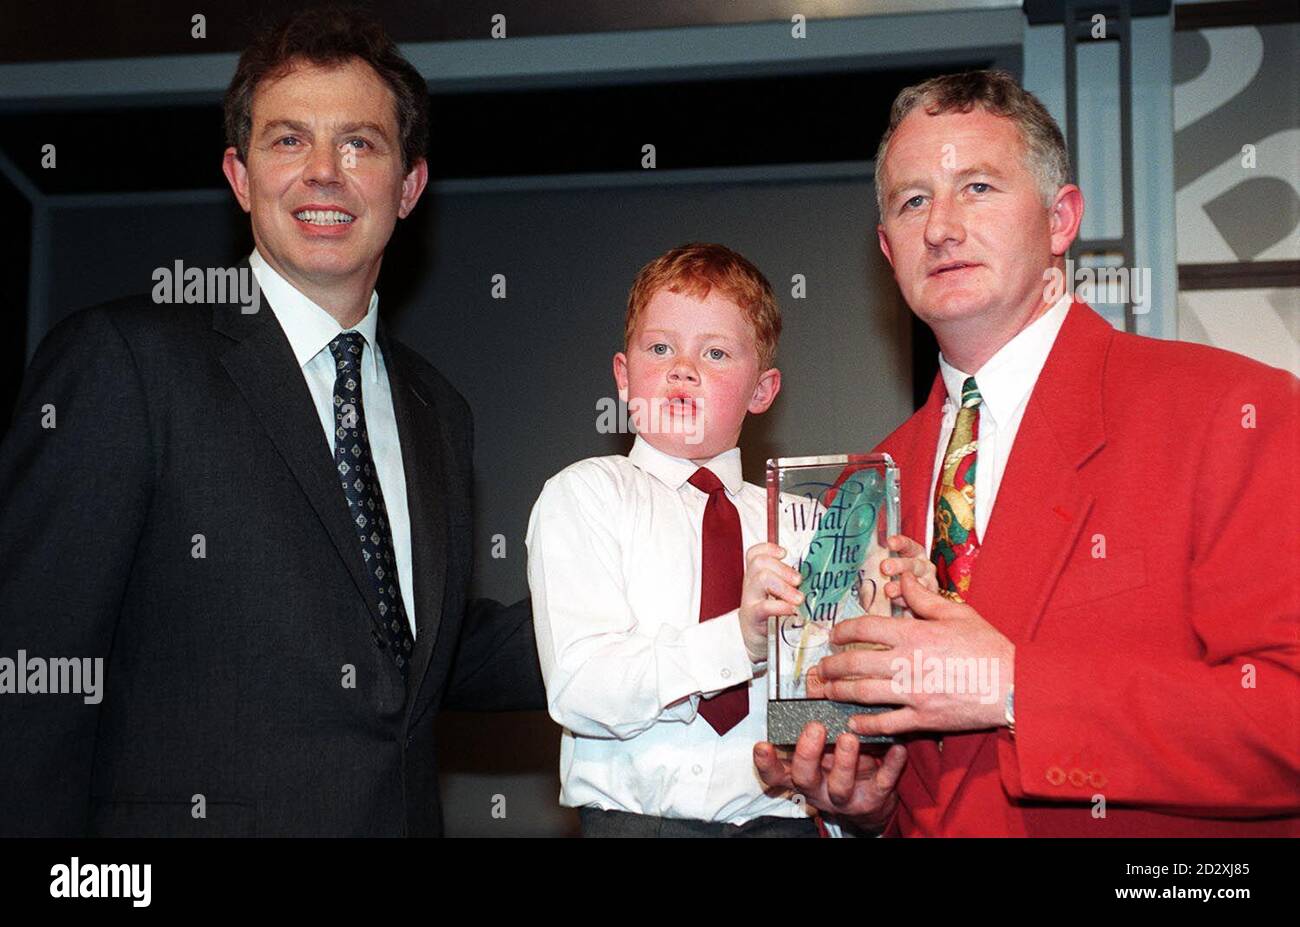 Graham Guerin And Son Cathal7 During The What The Papers Say Awards 1996 In London Today 7706